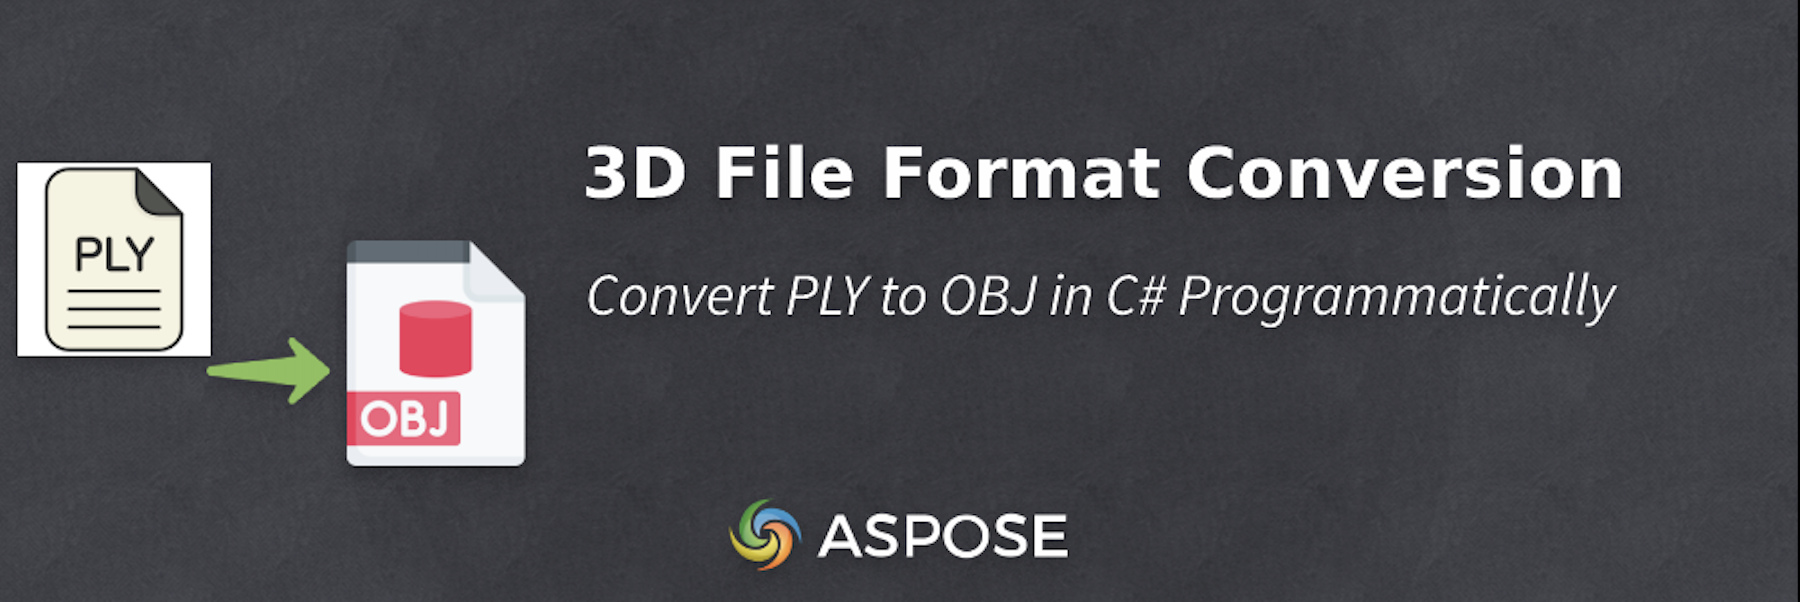 Convert PLY to OBJ in C# using 3D Graphics API